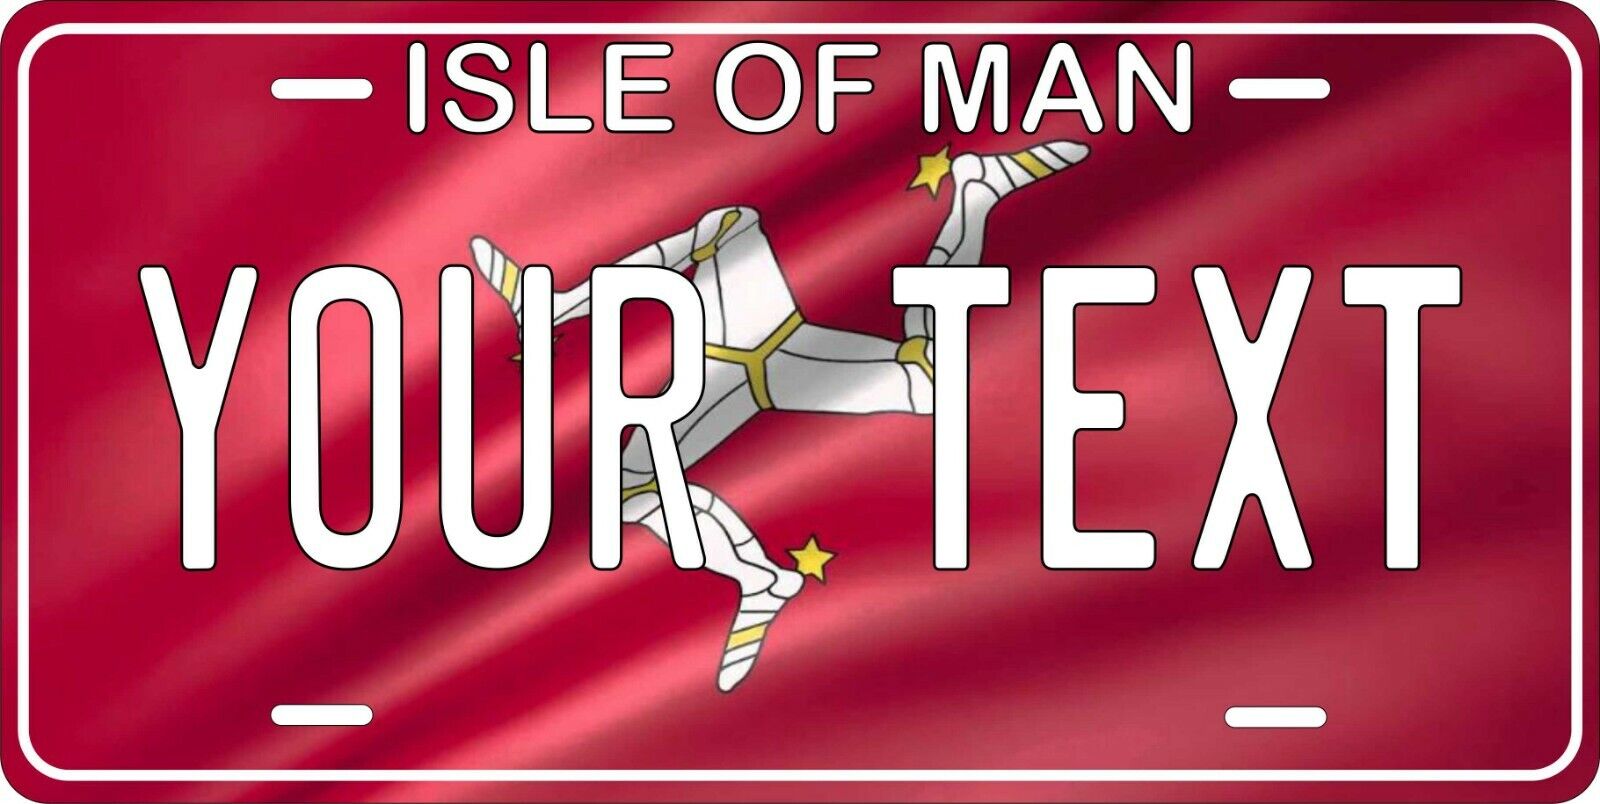 Isle of Man Flag License Plate Personalized Car Auto Bike Motorcycle Custom Tag